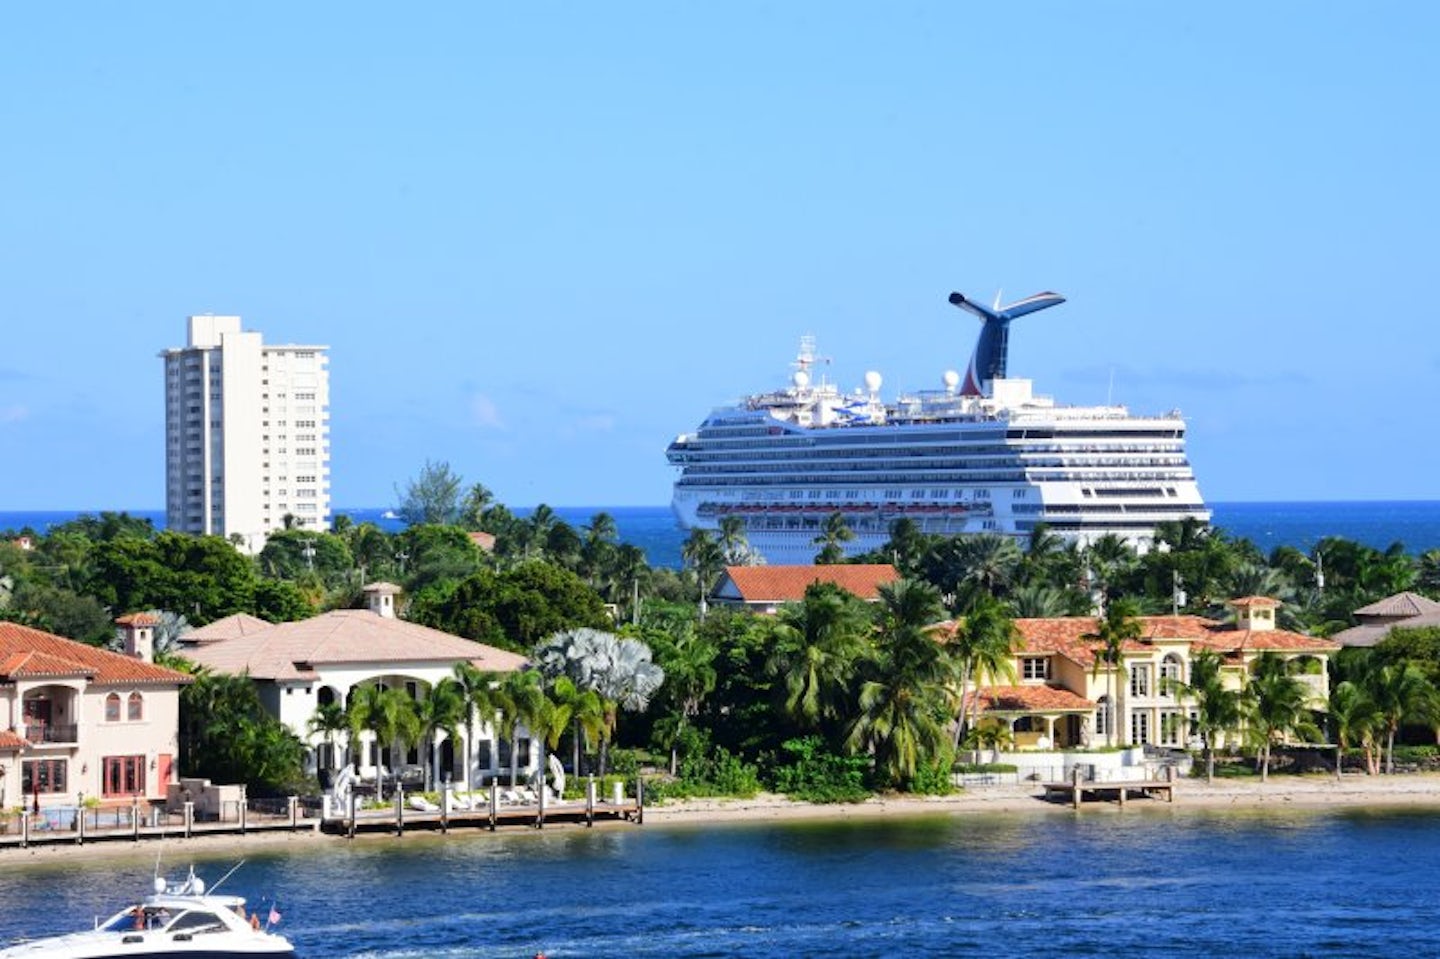 We're next in line as this cruise ship departs Ft. Lauderdale on Embark